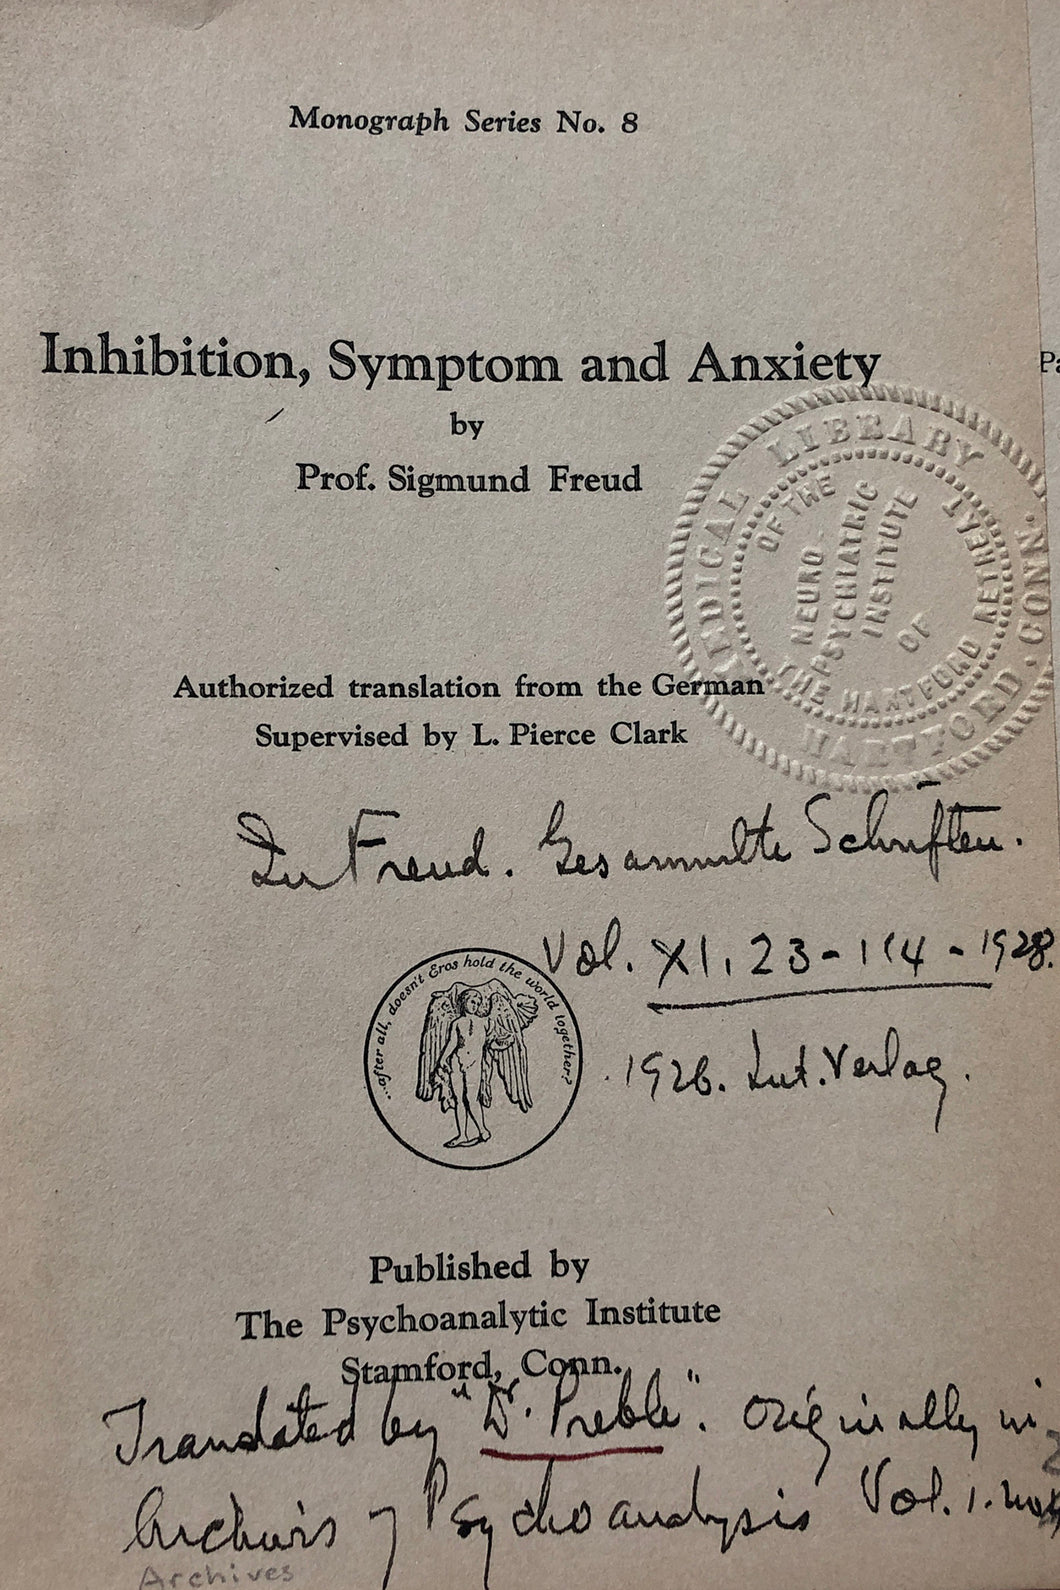 Inhibitions, Symptoms and Anxiety, by Sigmund Freud